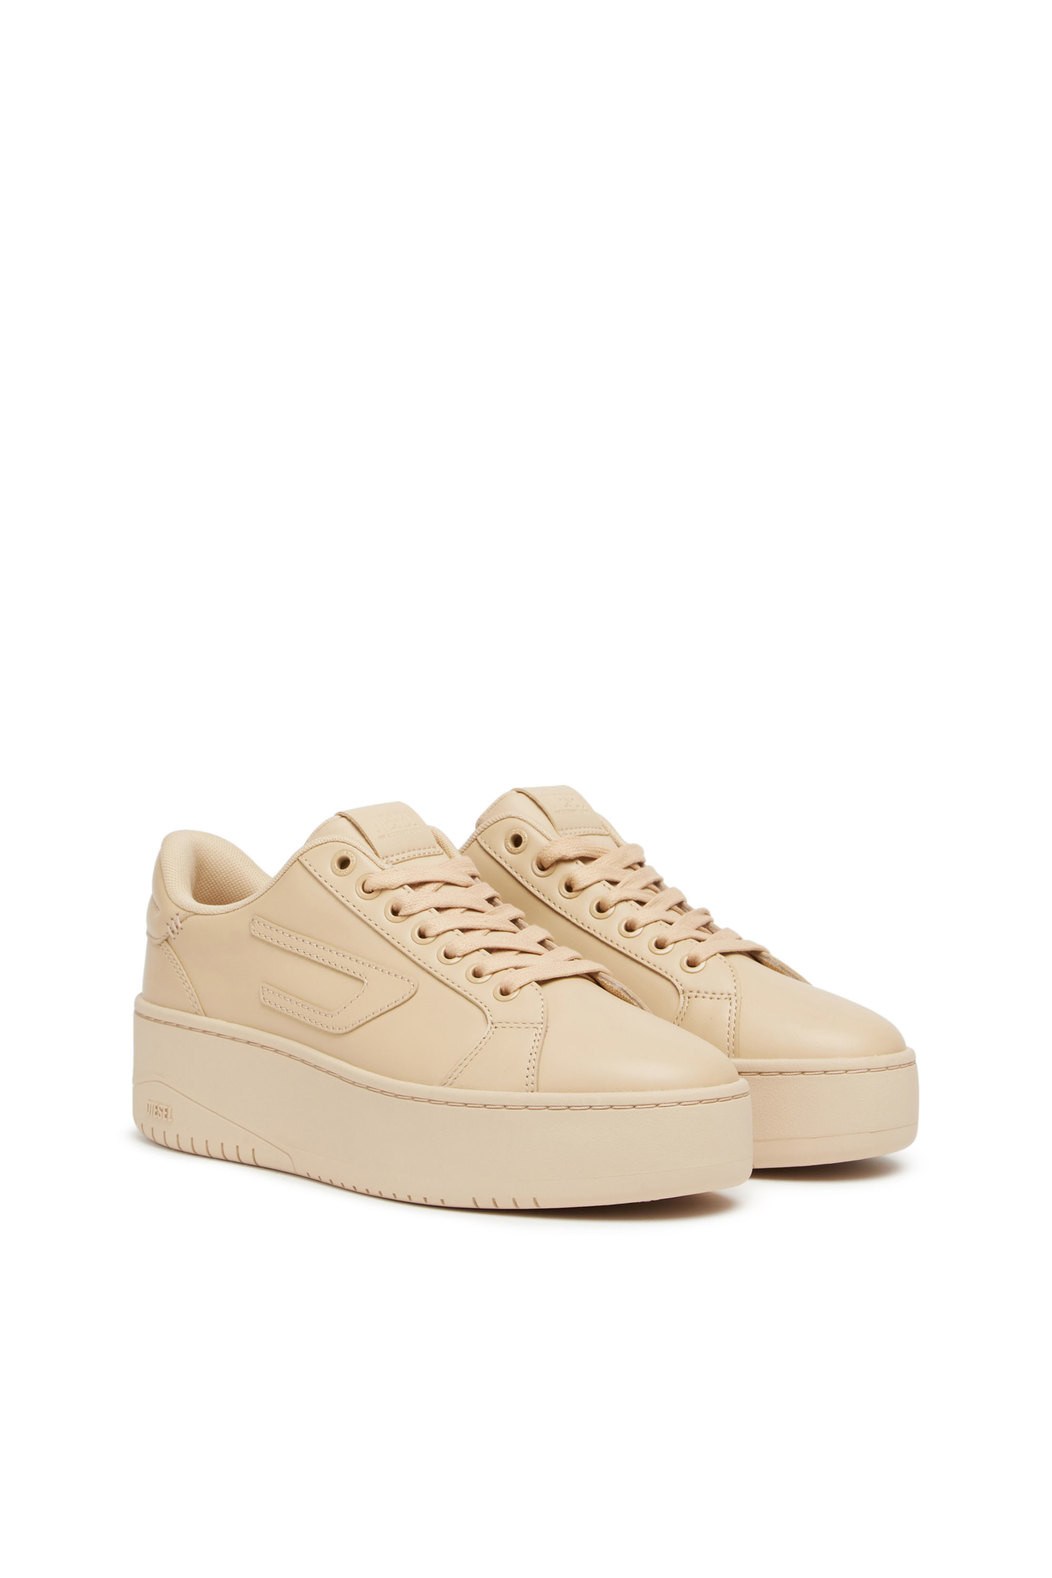 S-Athene Bold X - Flatform sneakers in leather